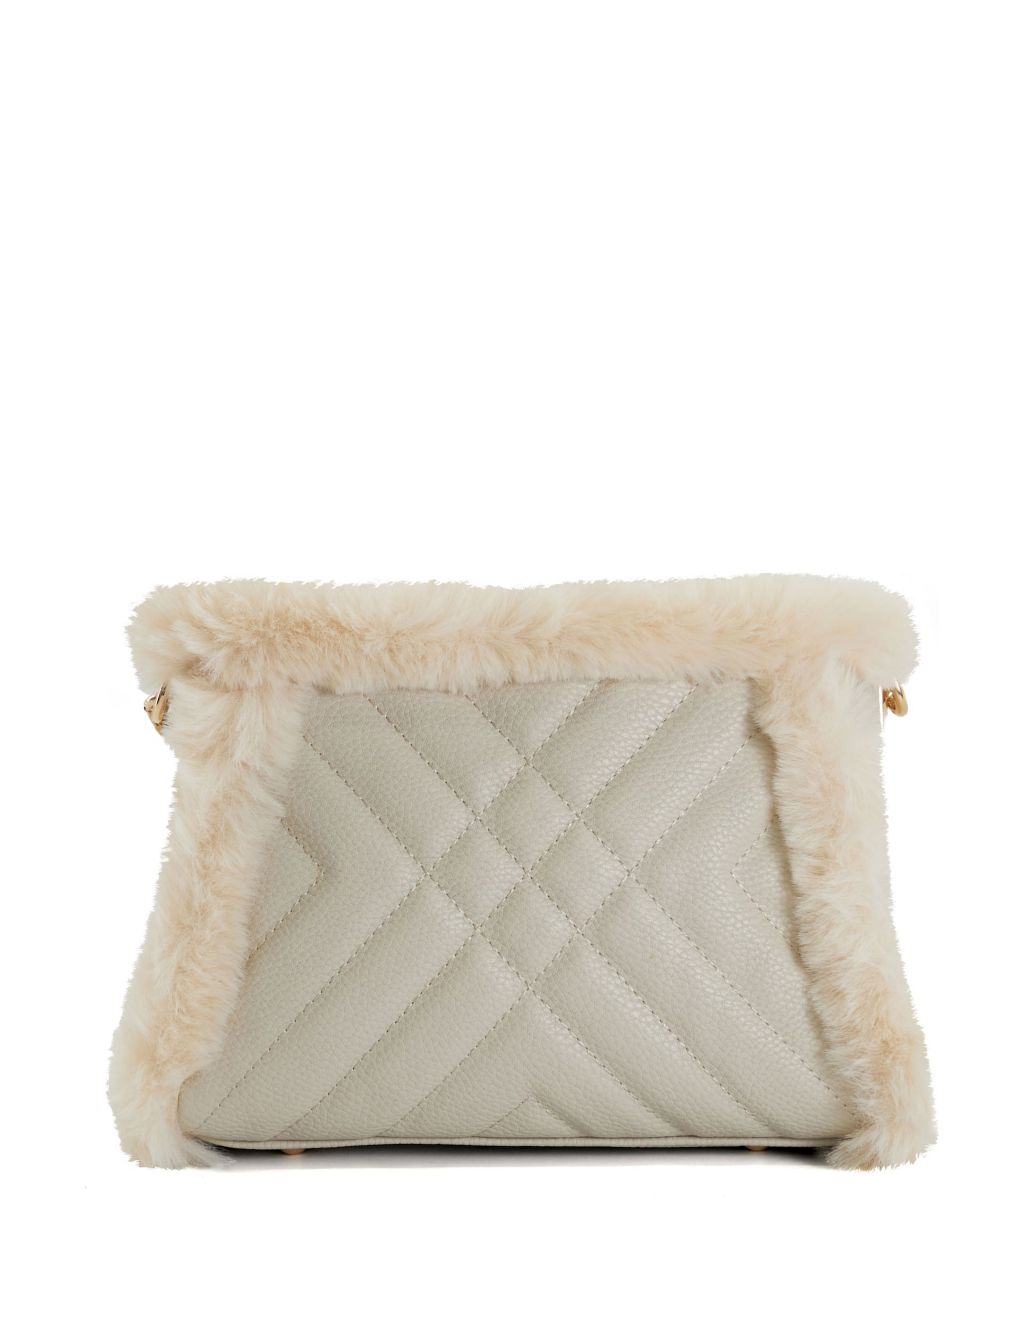 Faux Fur Trim Quilted Cross Body Bag image 3